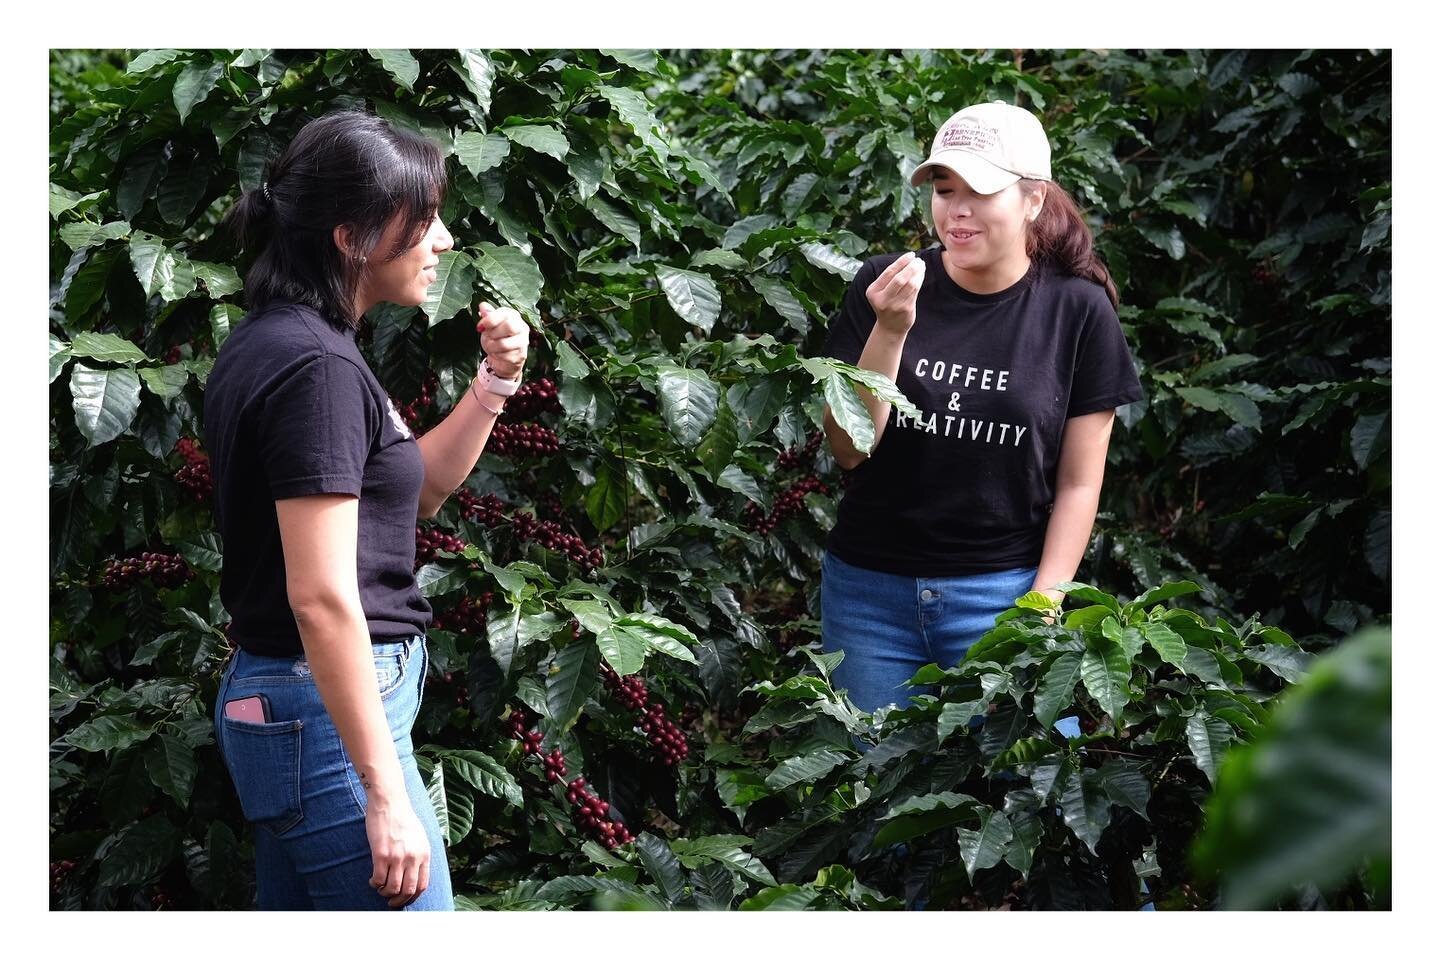 &ldquo;Finqueando&rdquo;, local slang to describe visiting coffee farms with good friends. Thanks so much for stopping by.